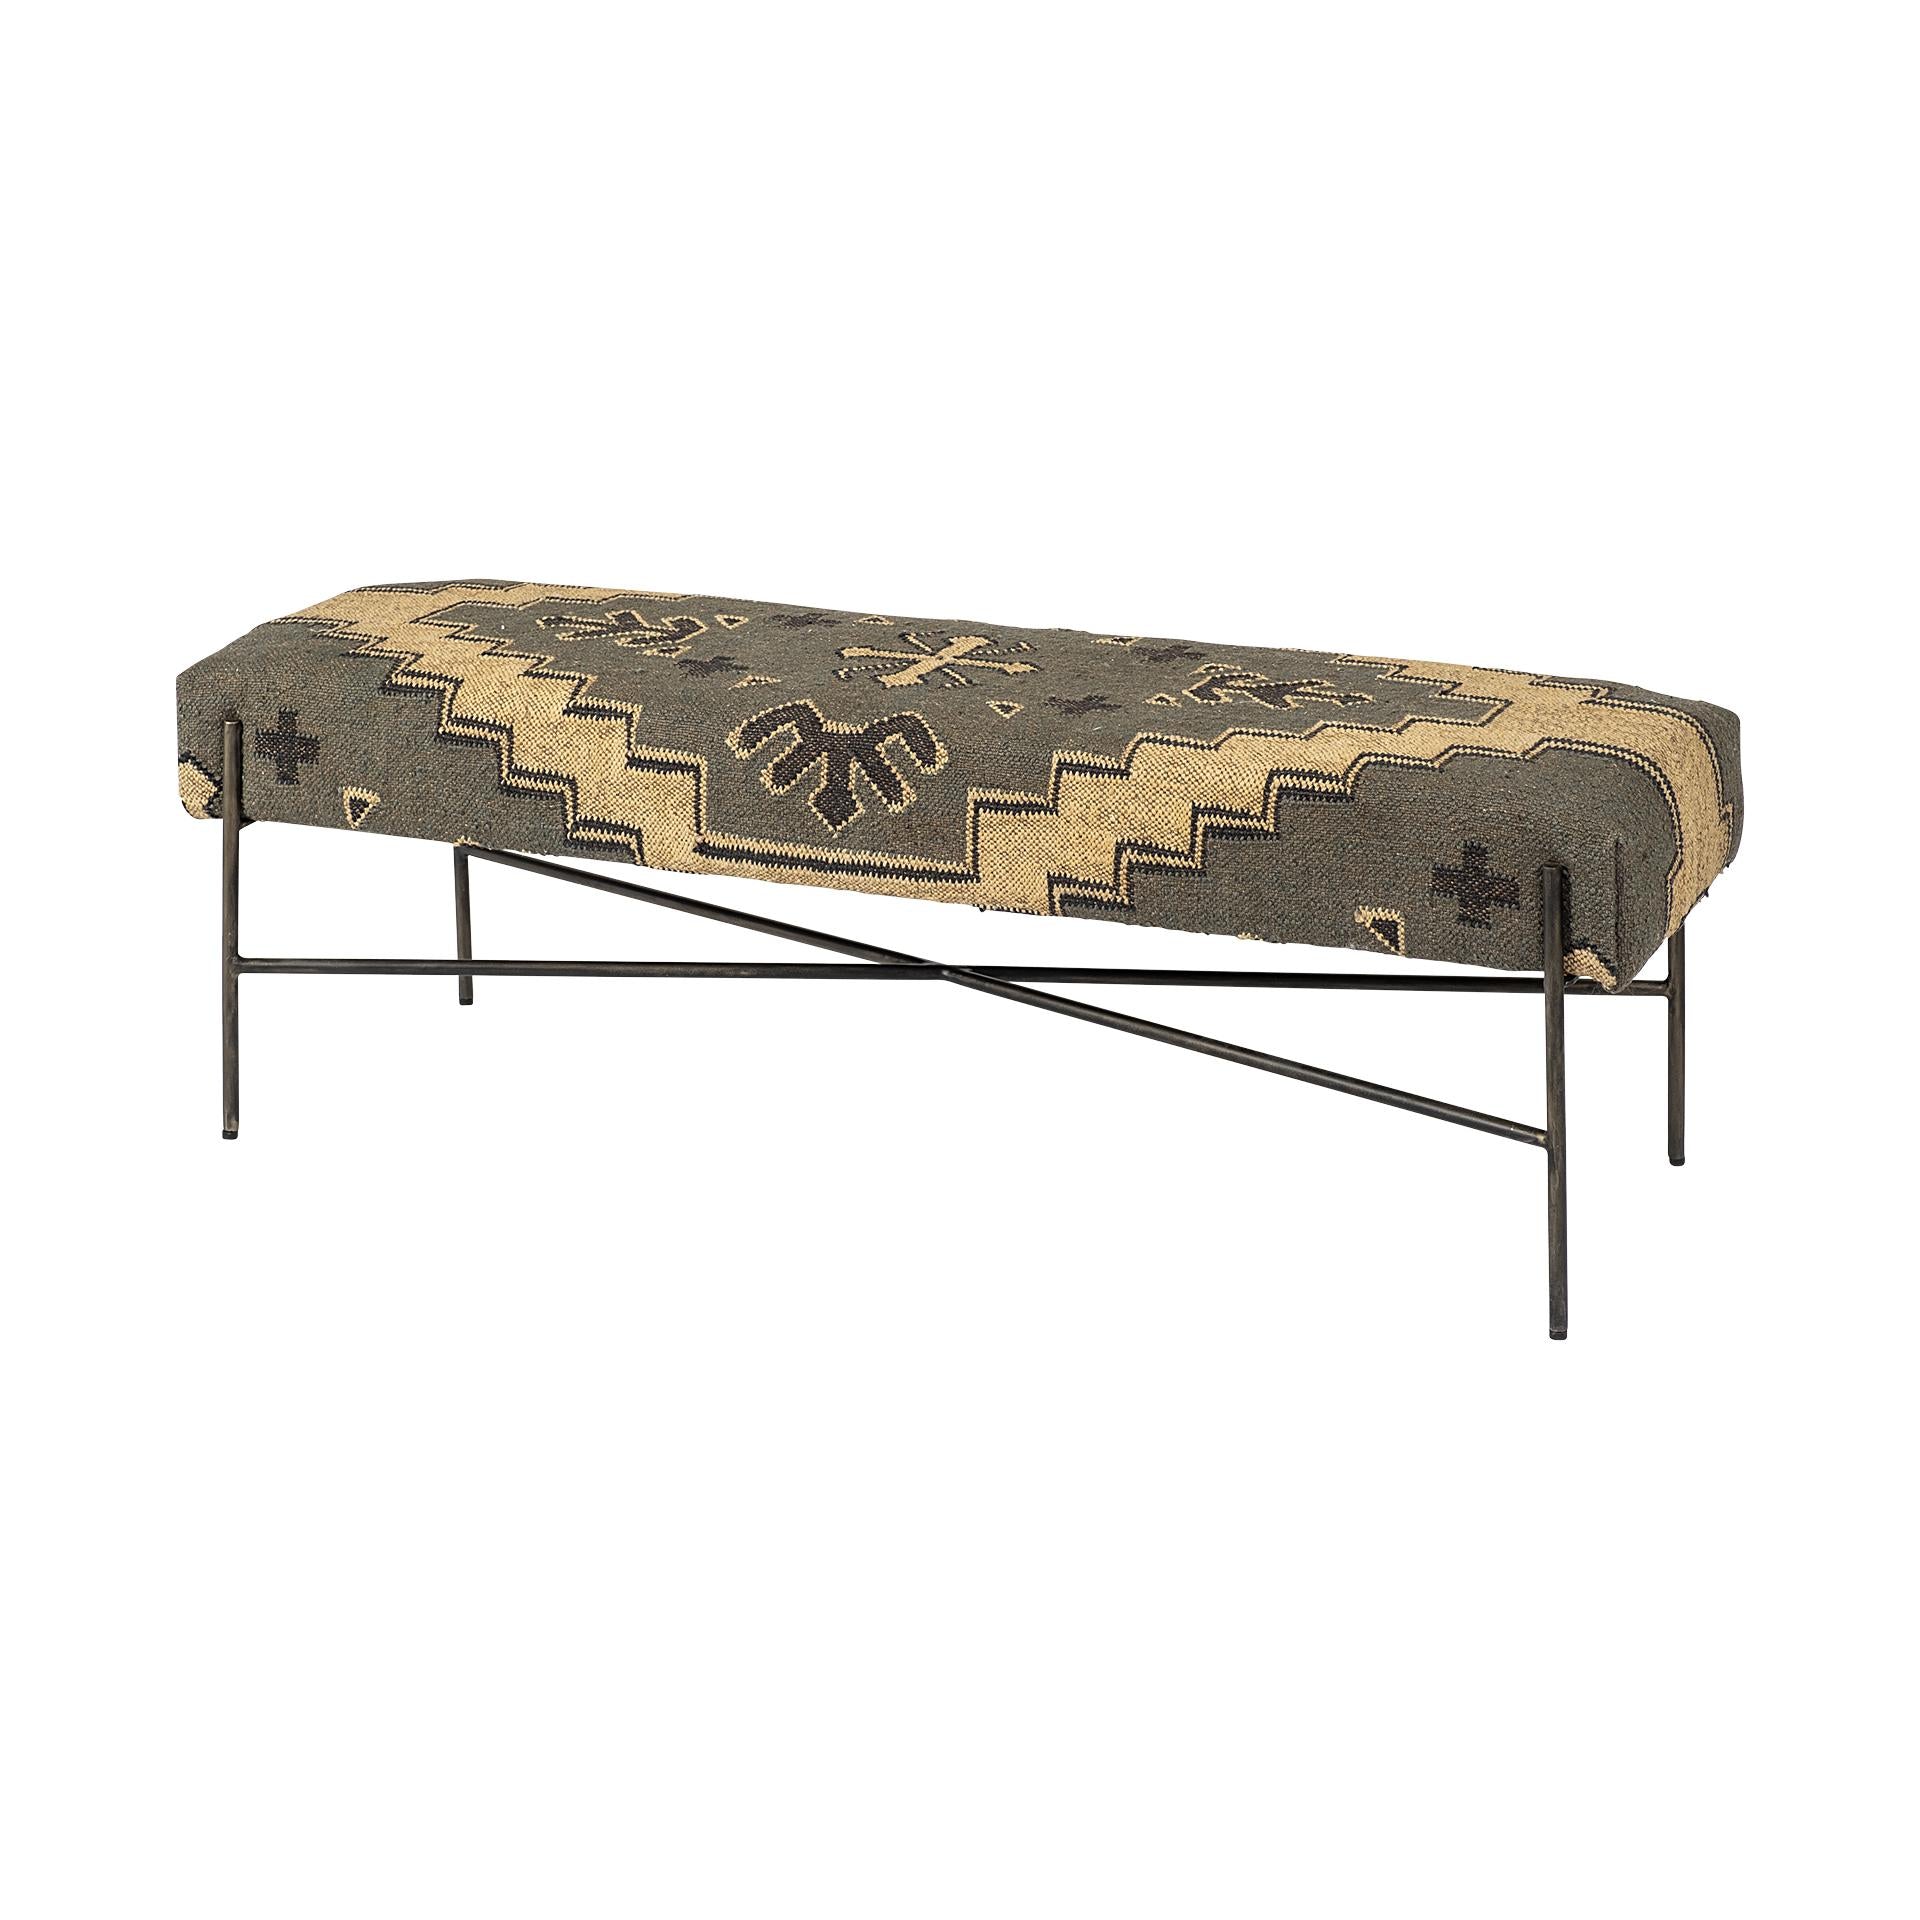 Rectangular MetalAntiqued-Nickel Toned Base W Upholstered Tan Pattered Seat Accent Bench